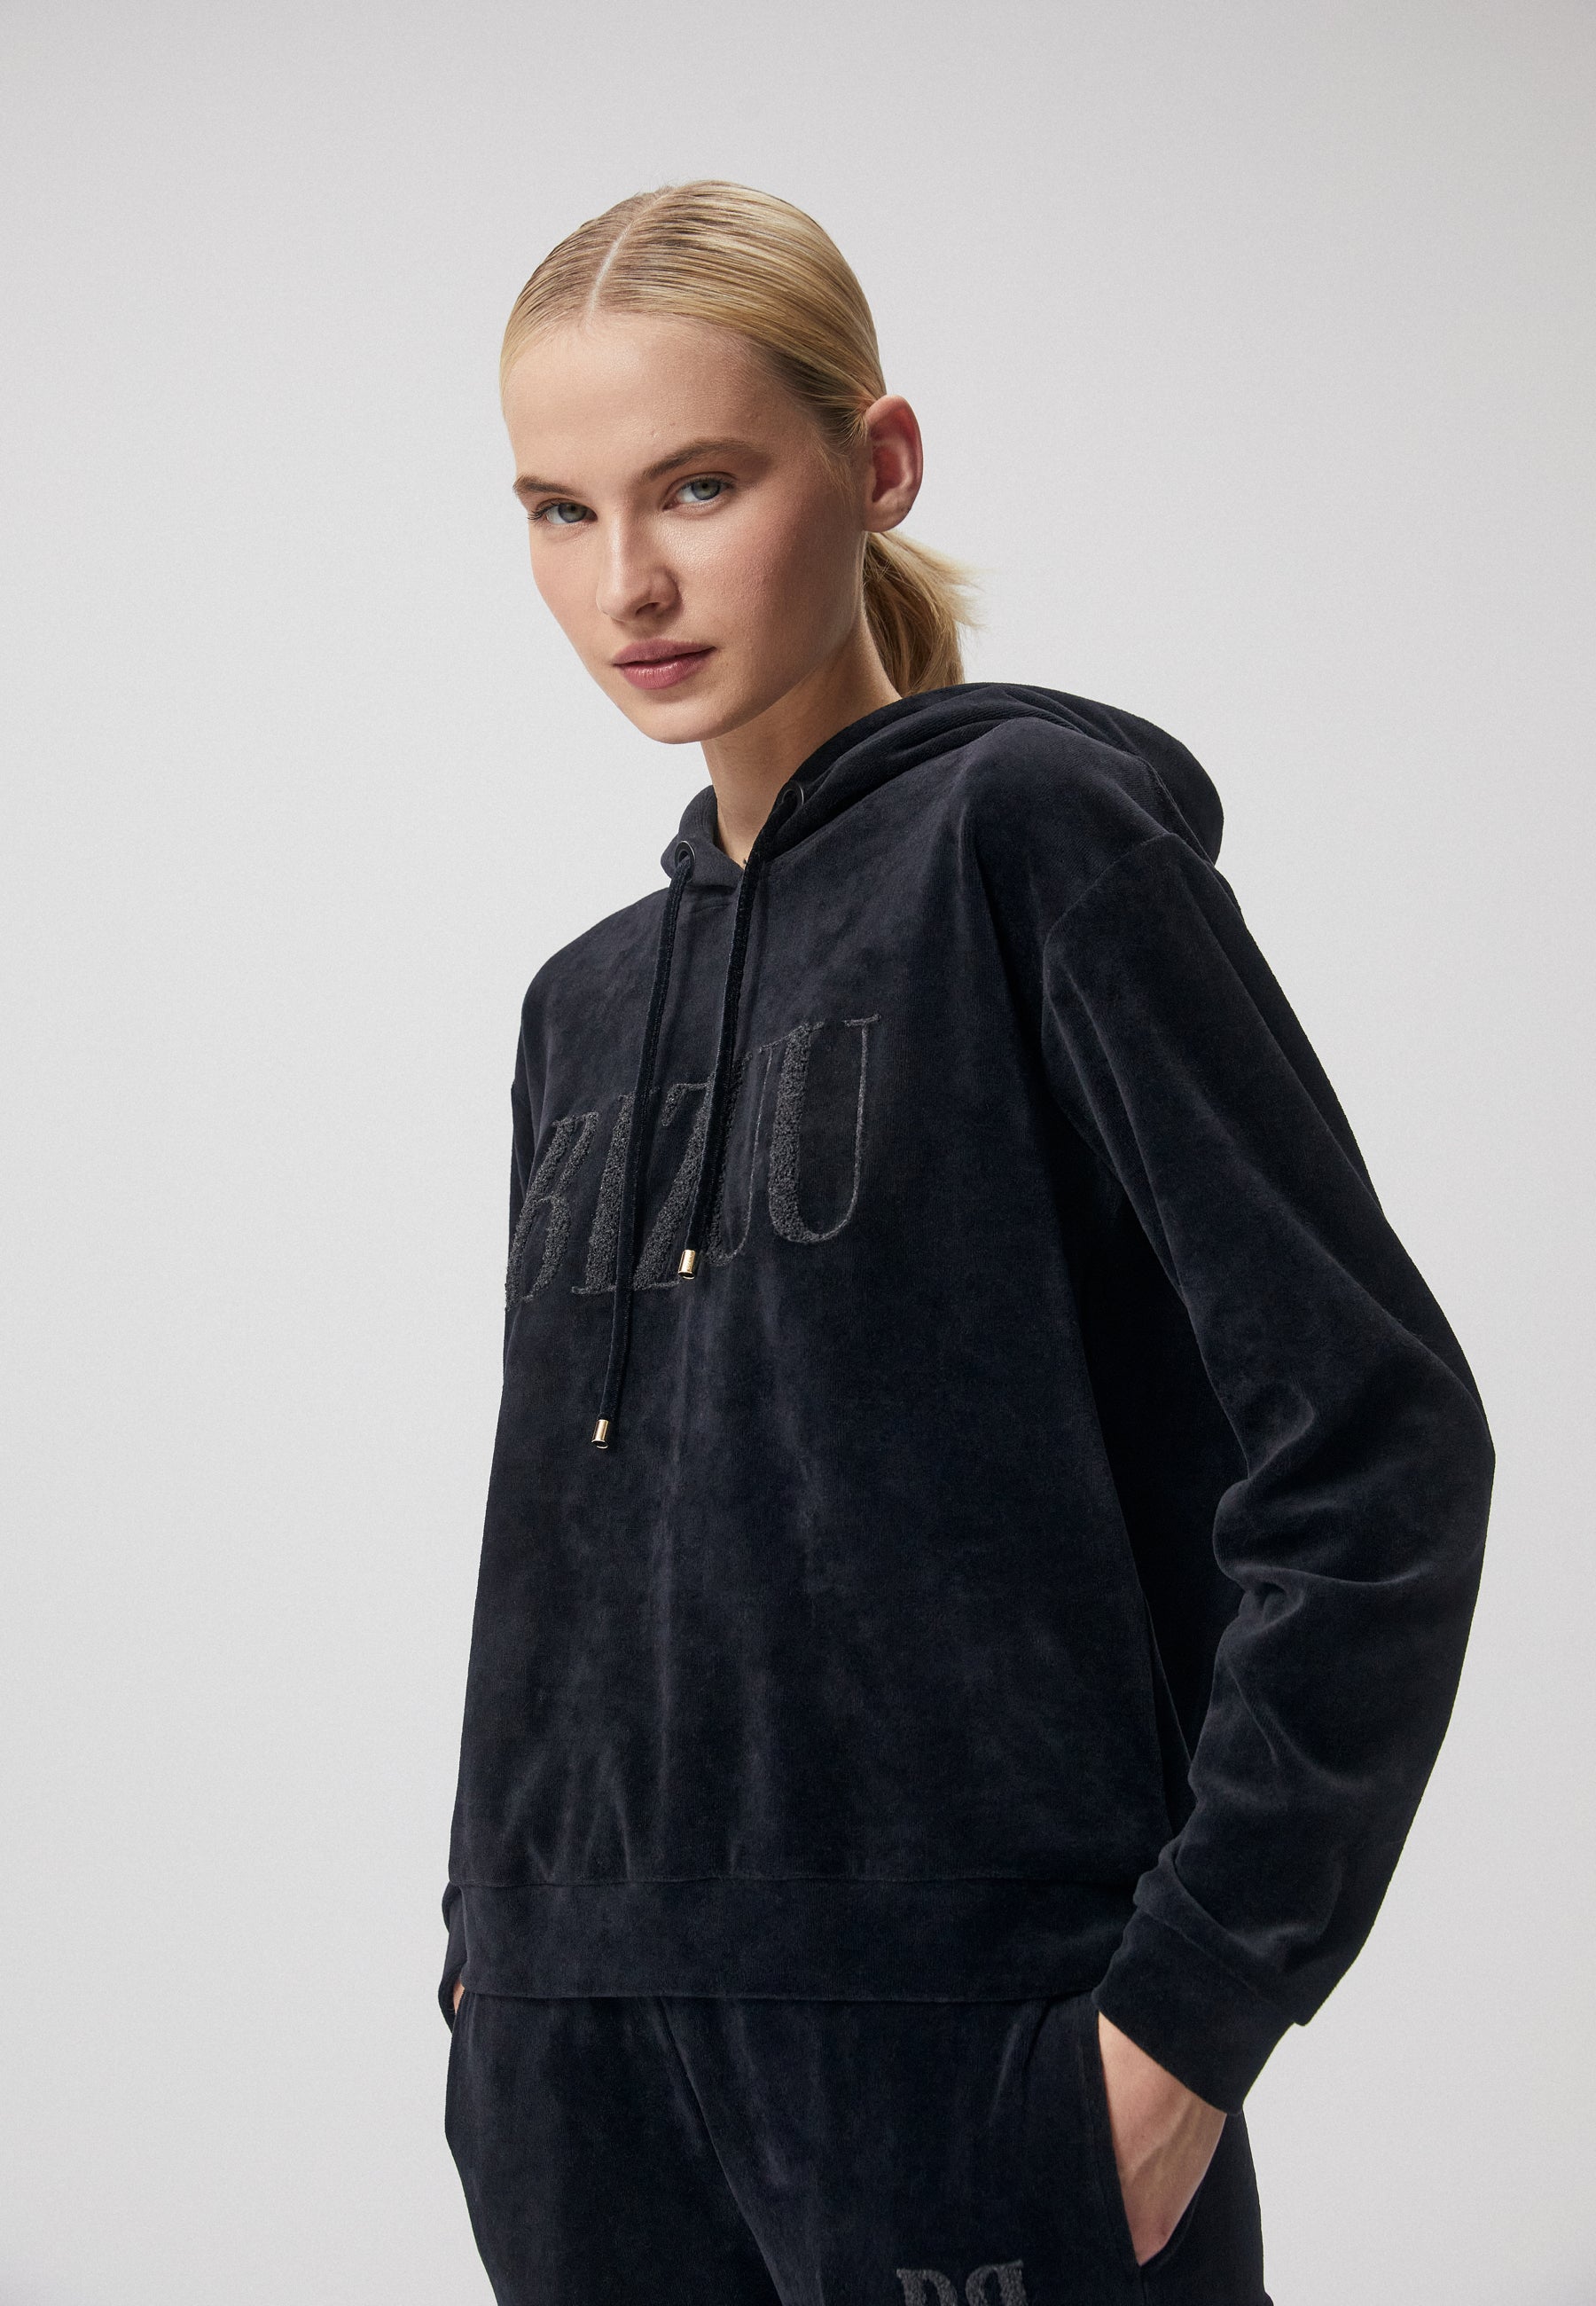 COME velour sweatshirt with an embroidered logo, black